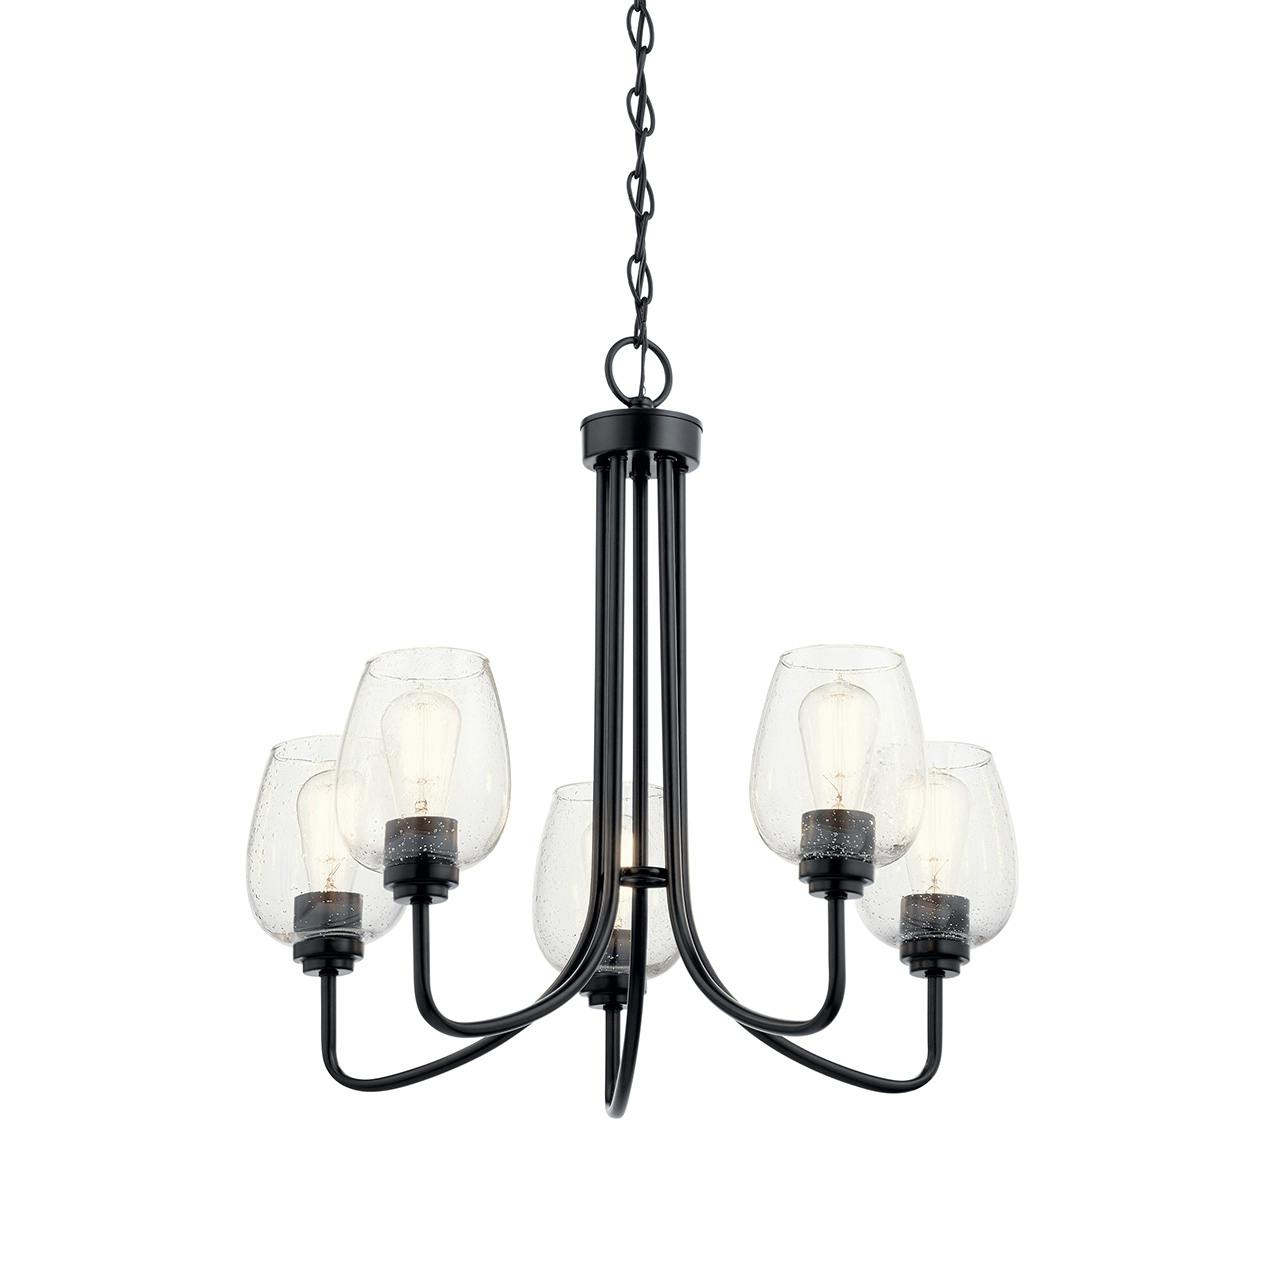 Valserrano™ 5 Light Chandelier Black without the canopy on a white background